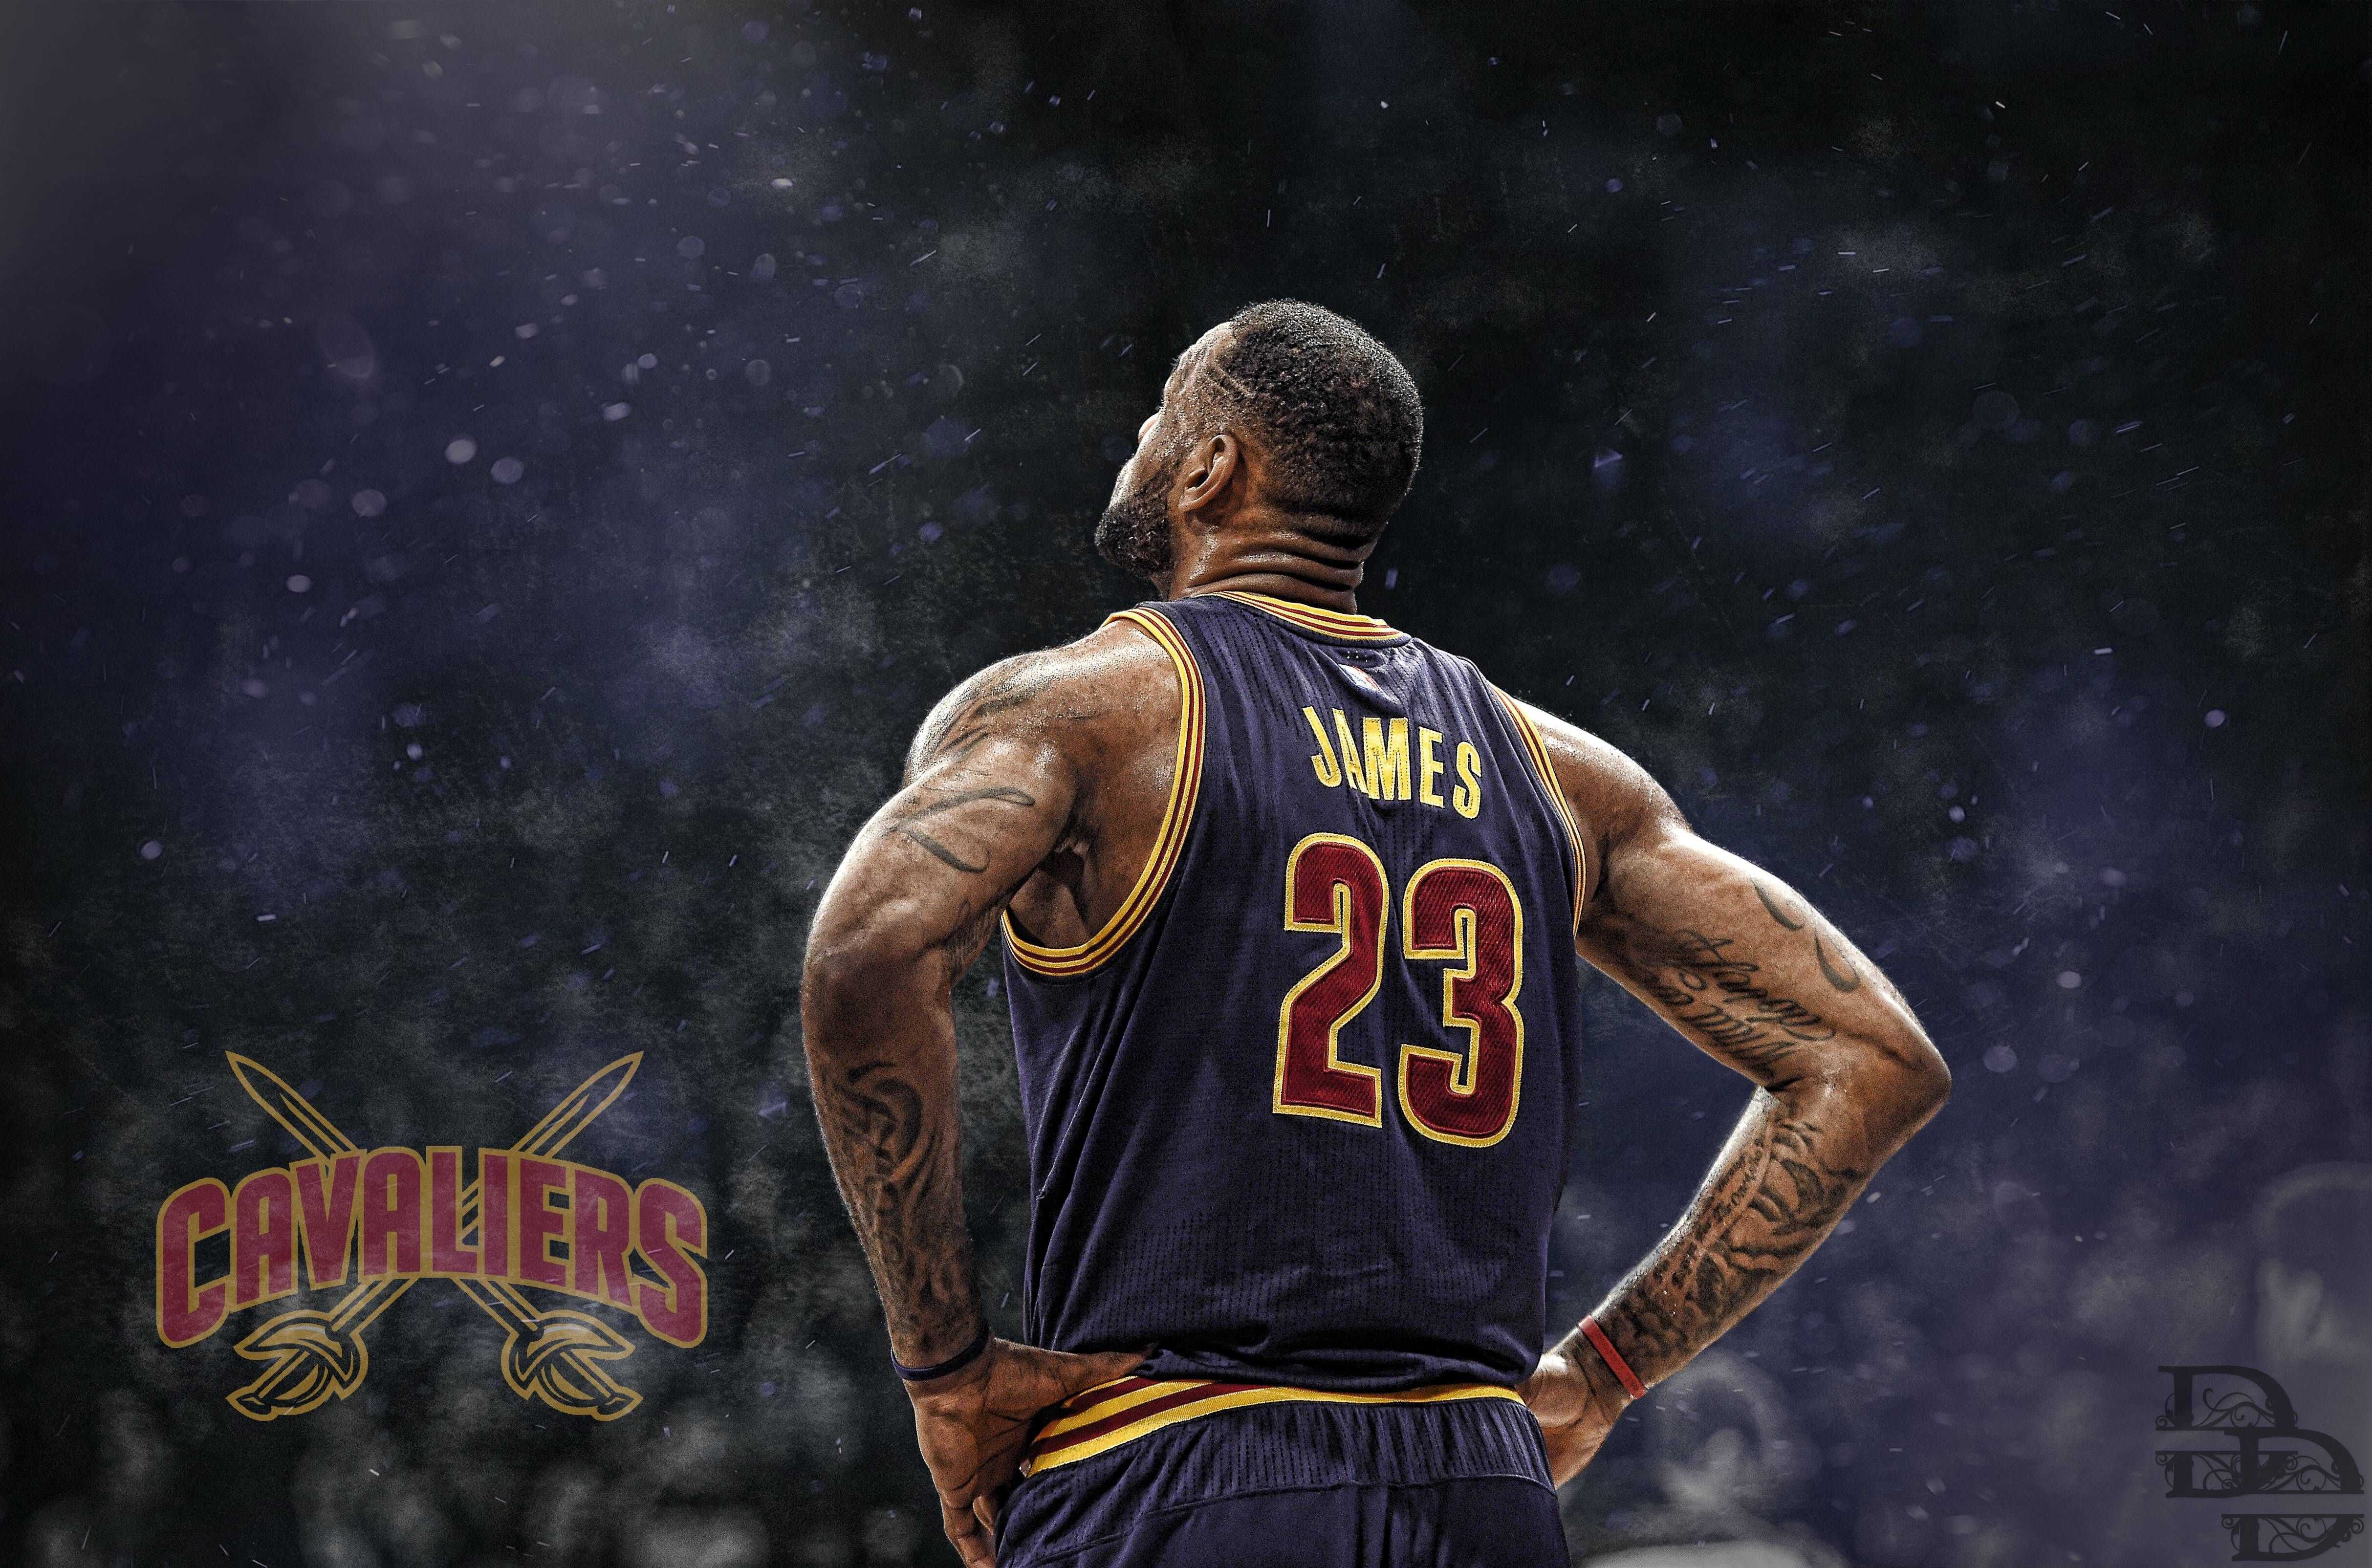 Lebron James Wallpaper High Quality For Androids Mobile Best HD Waraqh